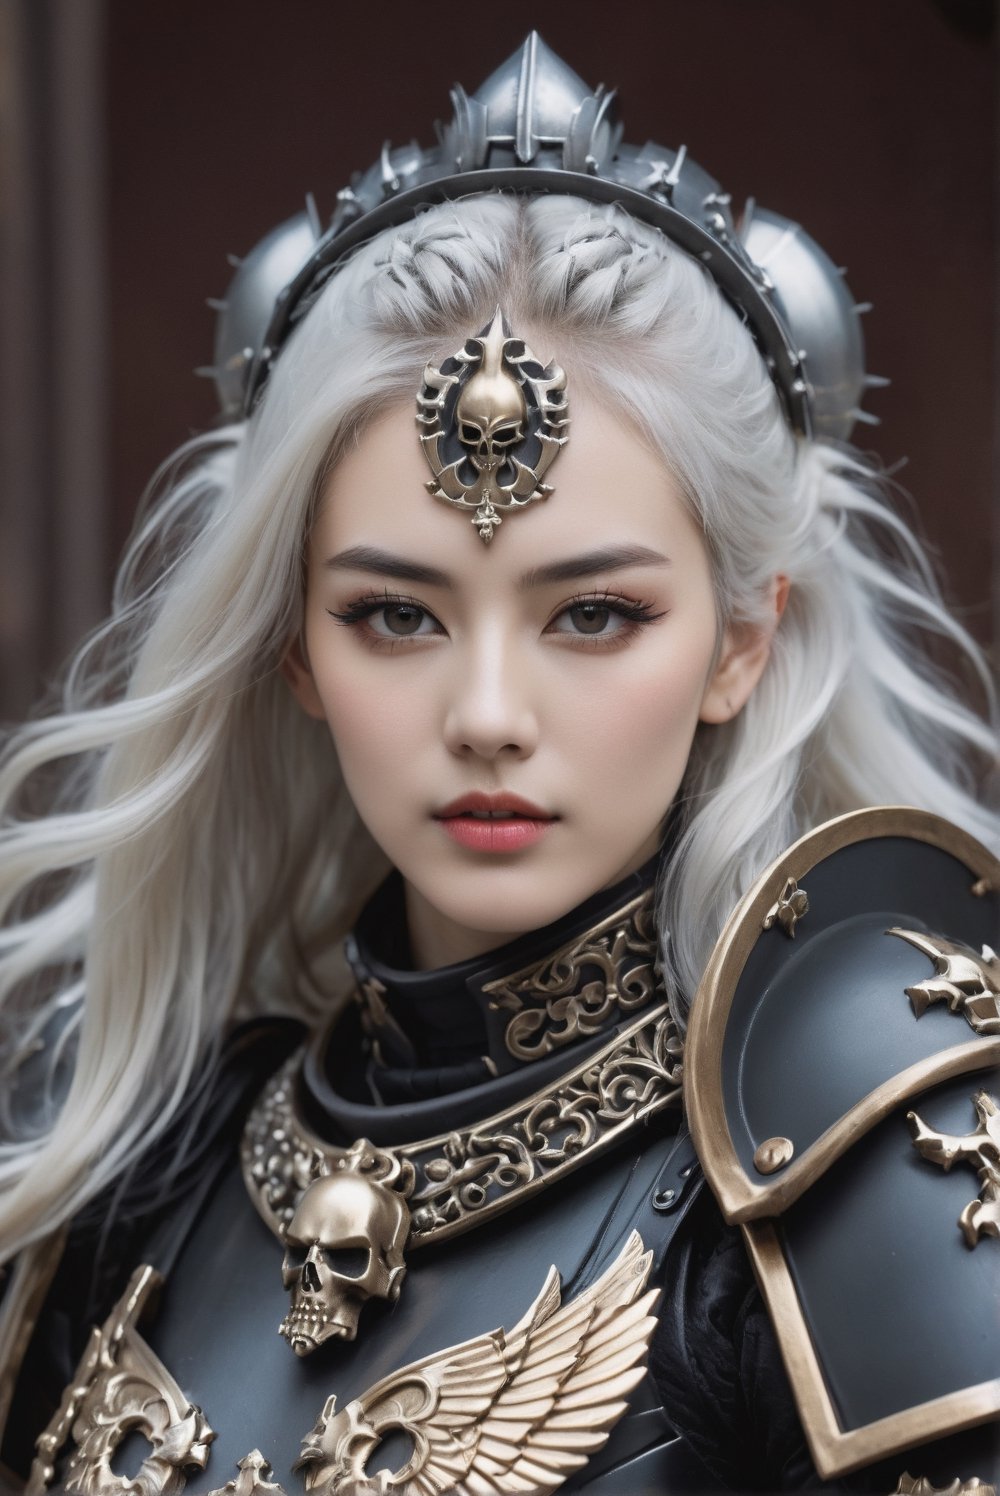 Cowboy shot. A girl wearing black heavy armor in the ornate gothic style, pauldron, metallic collar equiped with respiratory system, heavy knight armor. A 17-years-old ethereal breathtakingly glamorous japanese girl, white hair, hairband, slim and tall perfect model body, An ethereal beautiful face with v-shaped jawline, bright eyes, almond-shaped eyes, translucent skin texture, porcelain skin tone. Adorned with symbols of inquisition accentuating her high status as an inquisitor. The best warrior of inquisition. award-winning, hyperrealistic, raw photo, holding Bolter, warrior